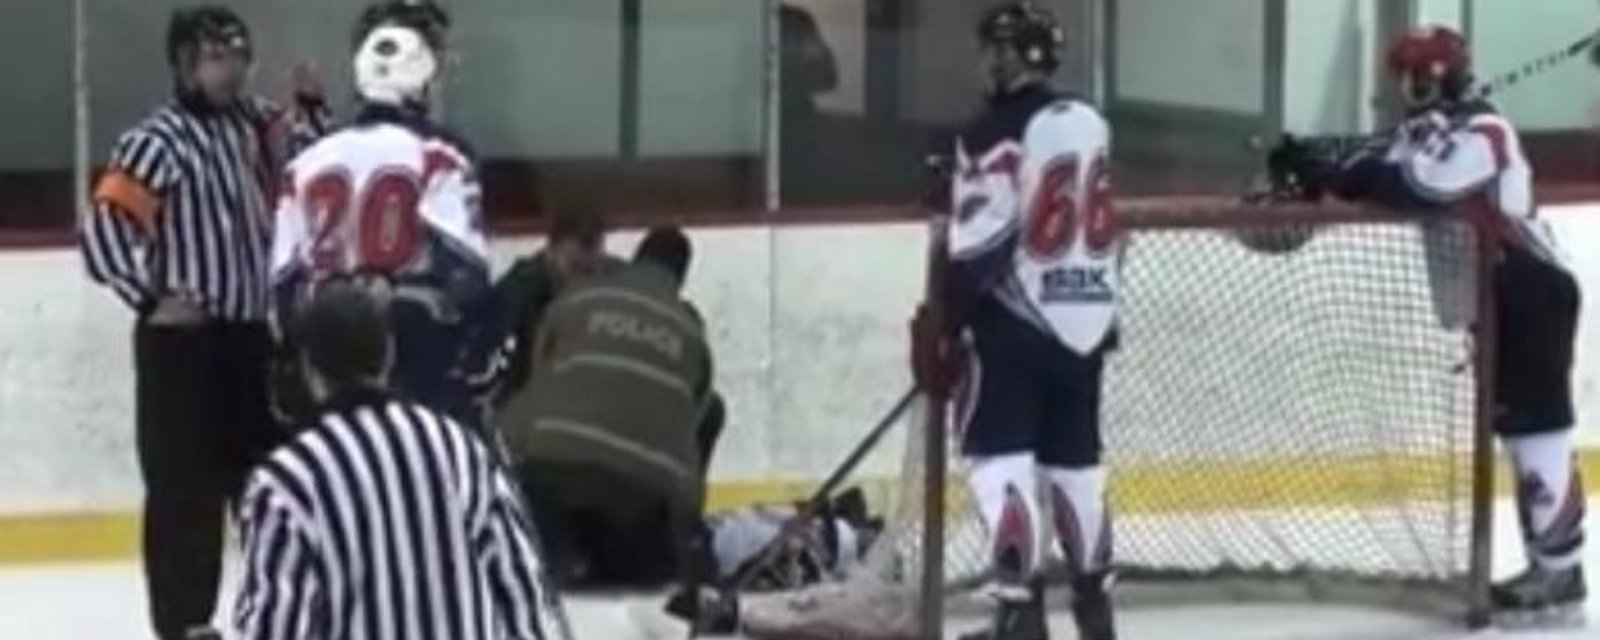 Player handcuffed and arrested while still on the ice!